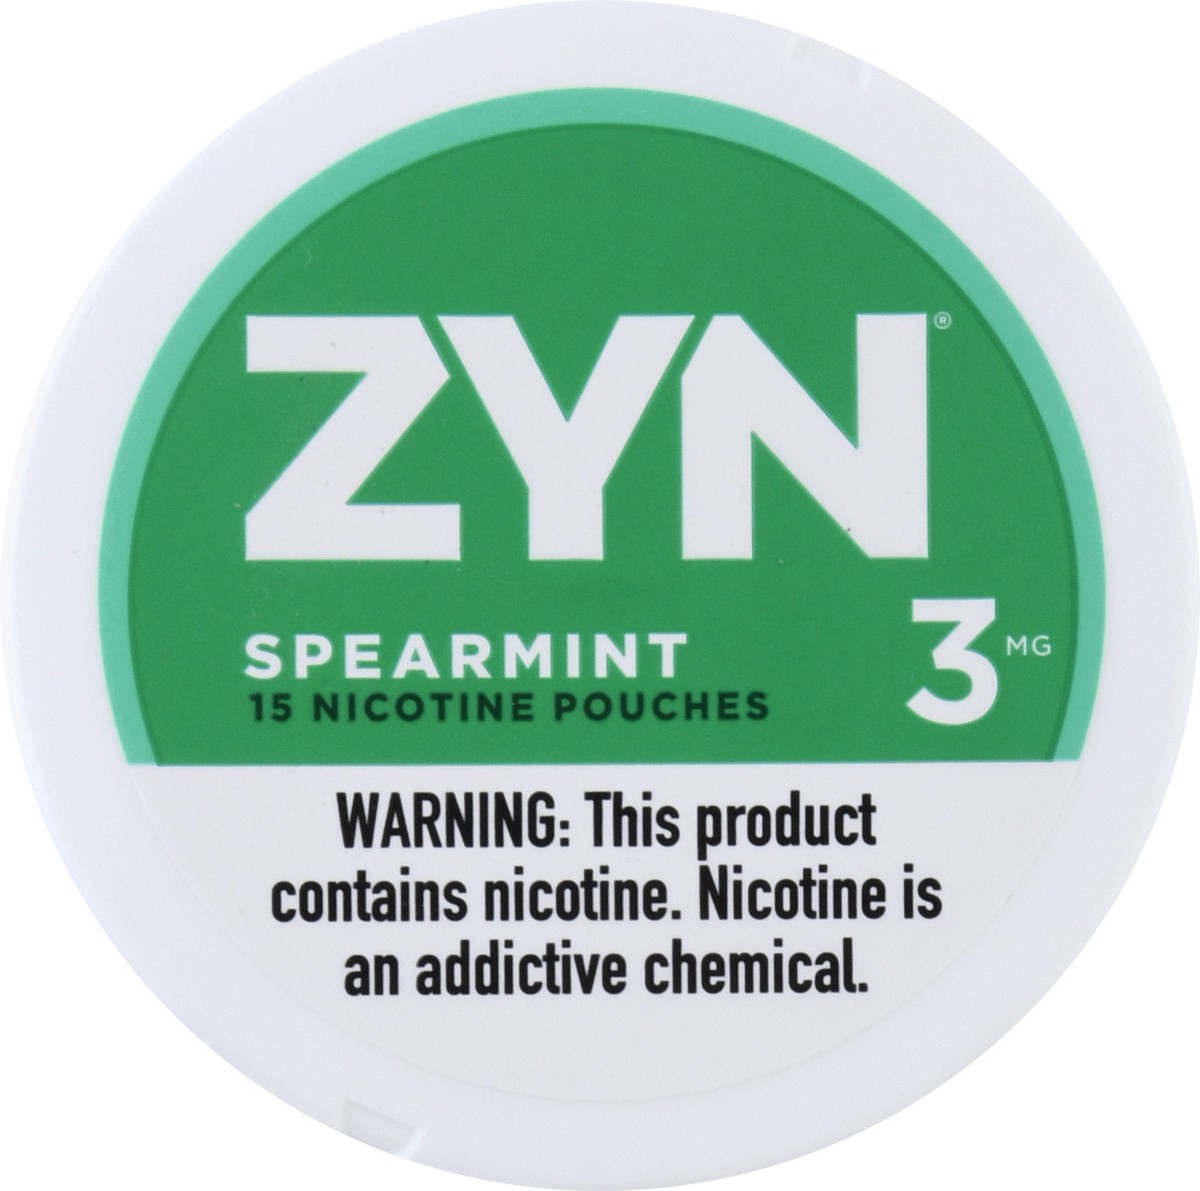 slide 2 of 10, Zyn Spearmint 3Mg Nicotine Pouches, 15 ct